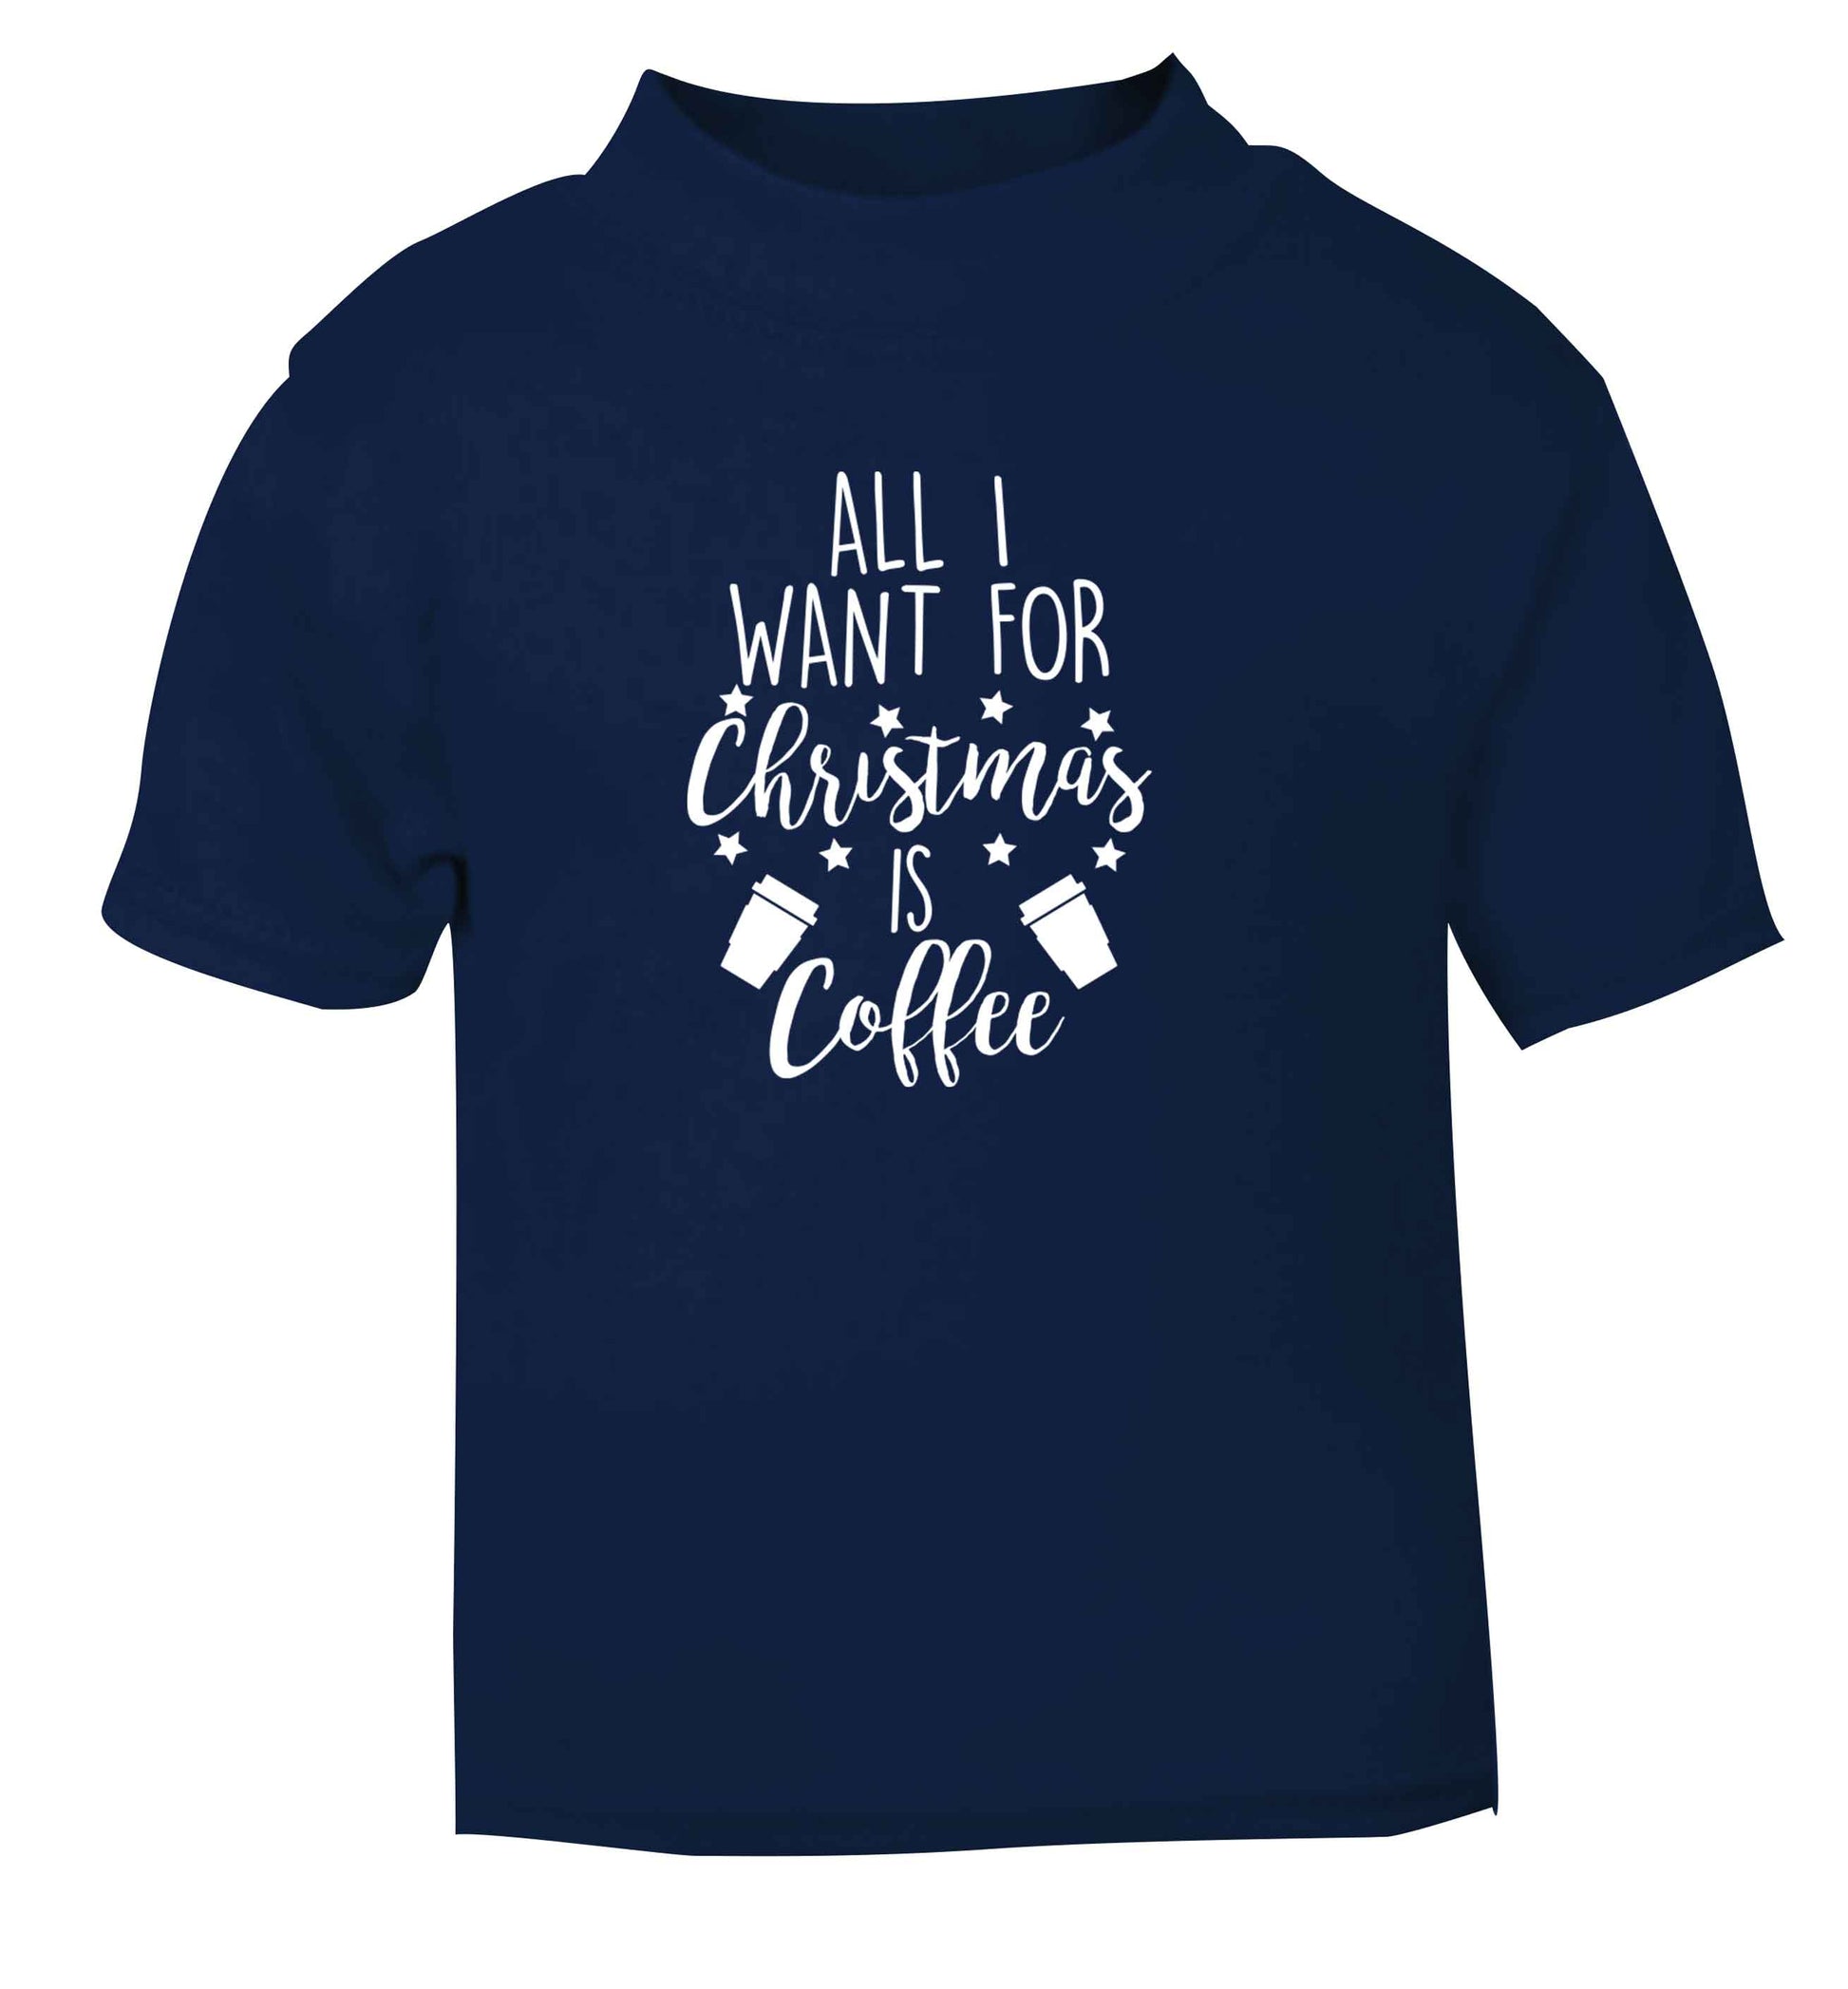 All I want for Christmas is coffee navy Baby Toddler Tshirt 2 Years